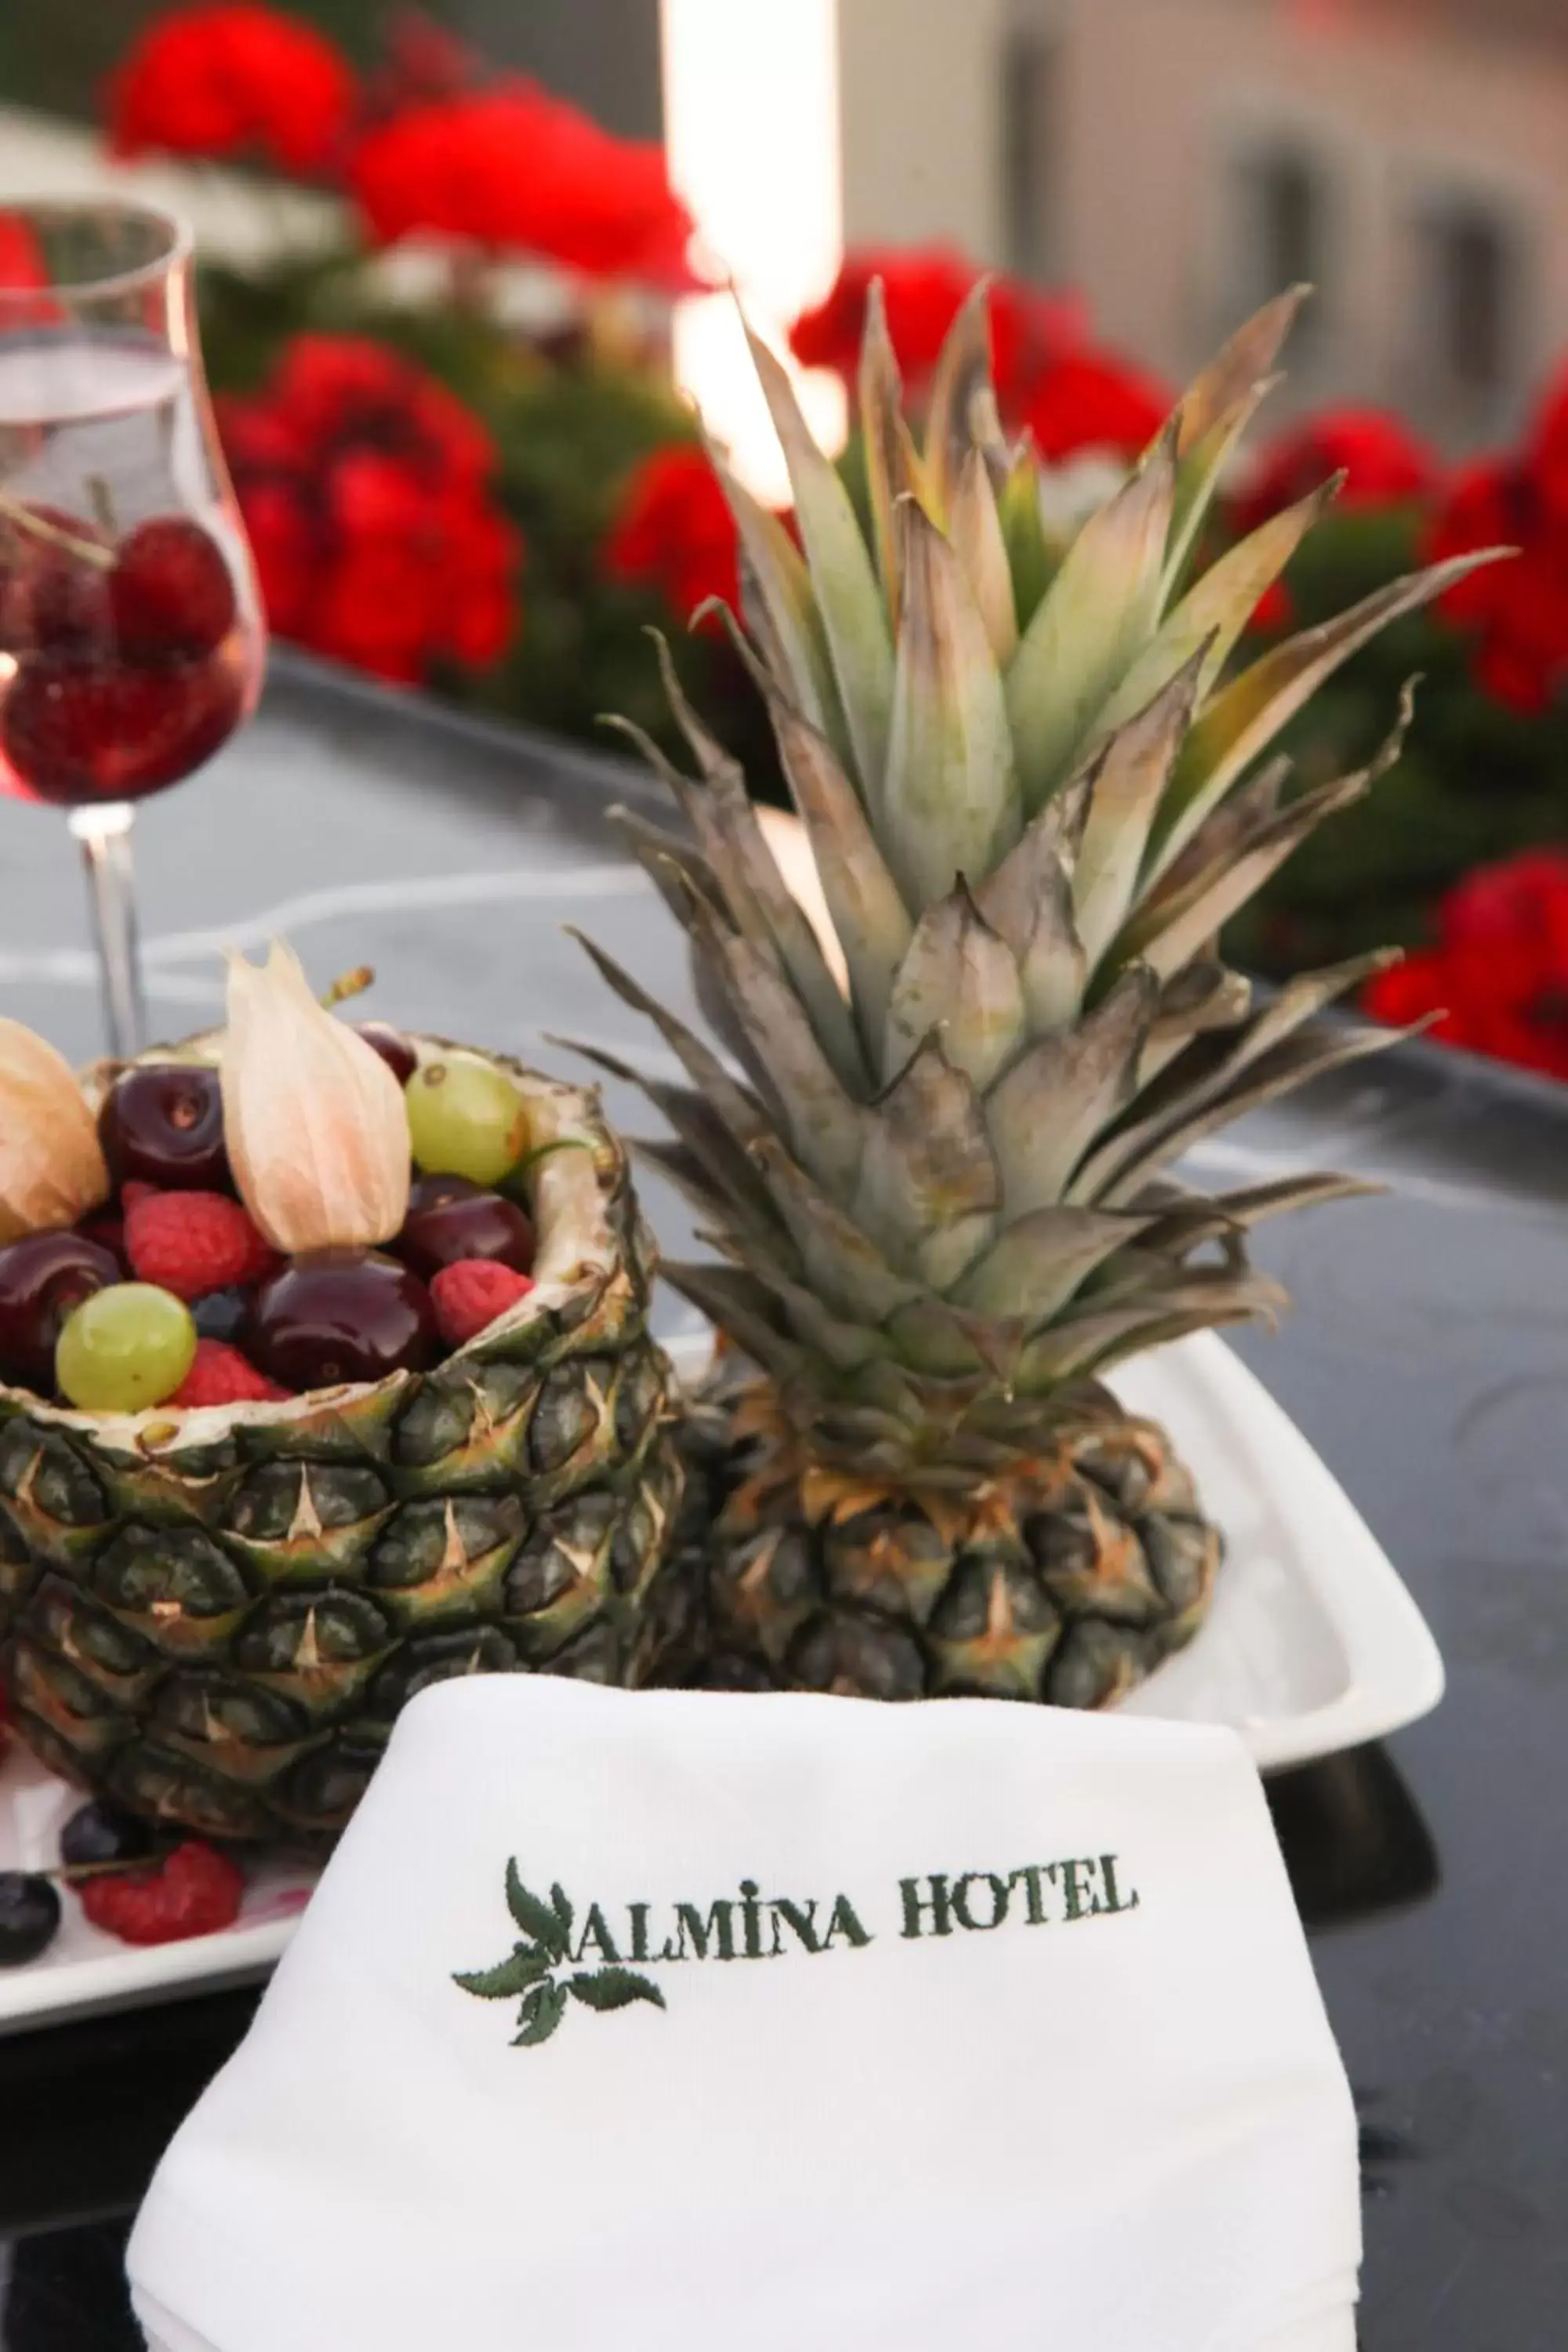 Food and drinks in Almina Hotel - Special Class